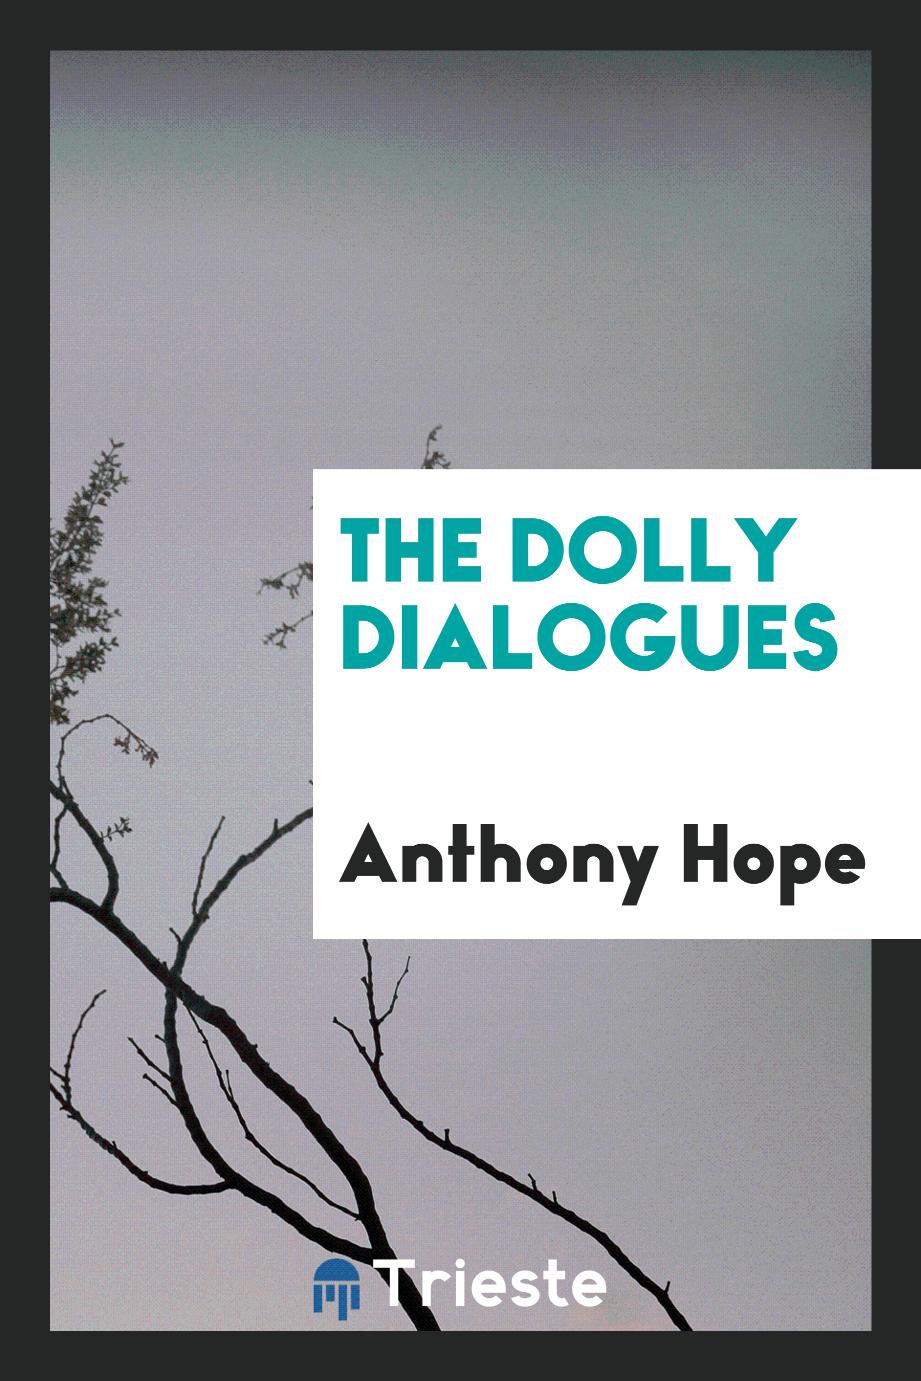 The Dolly dialogues